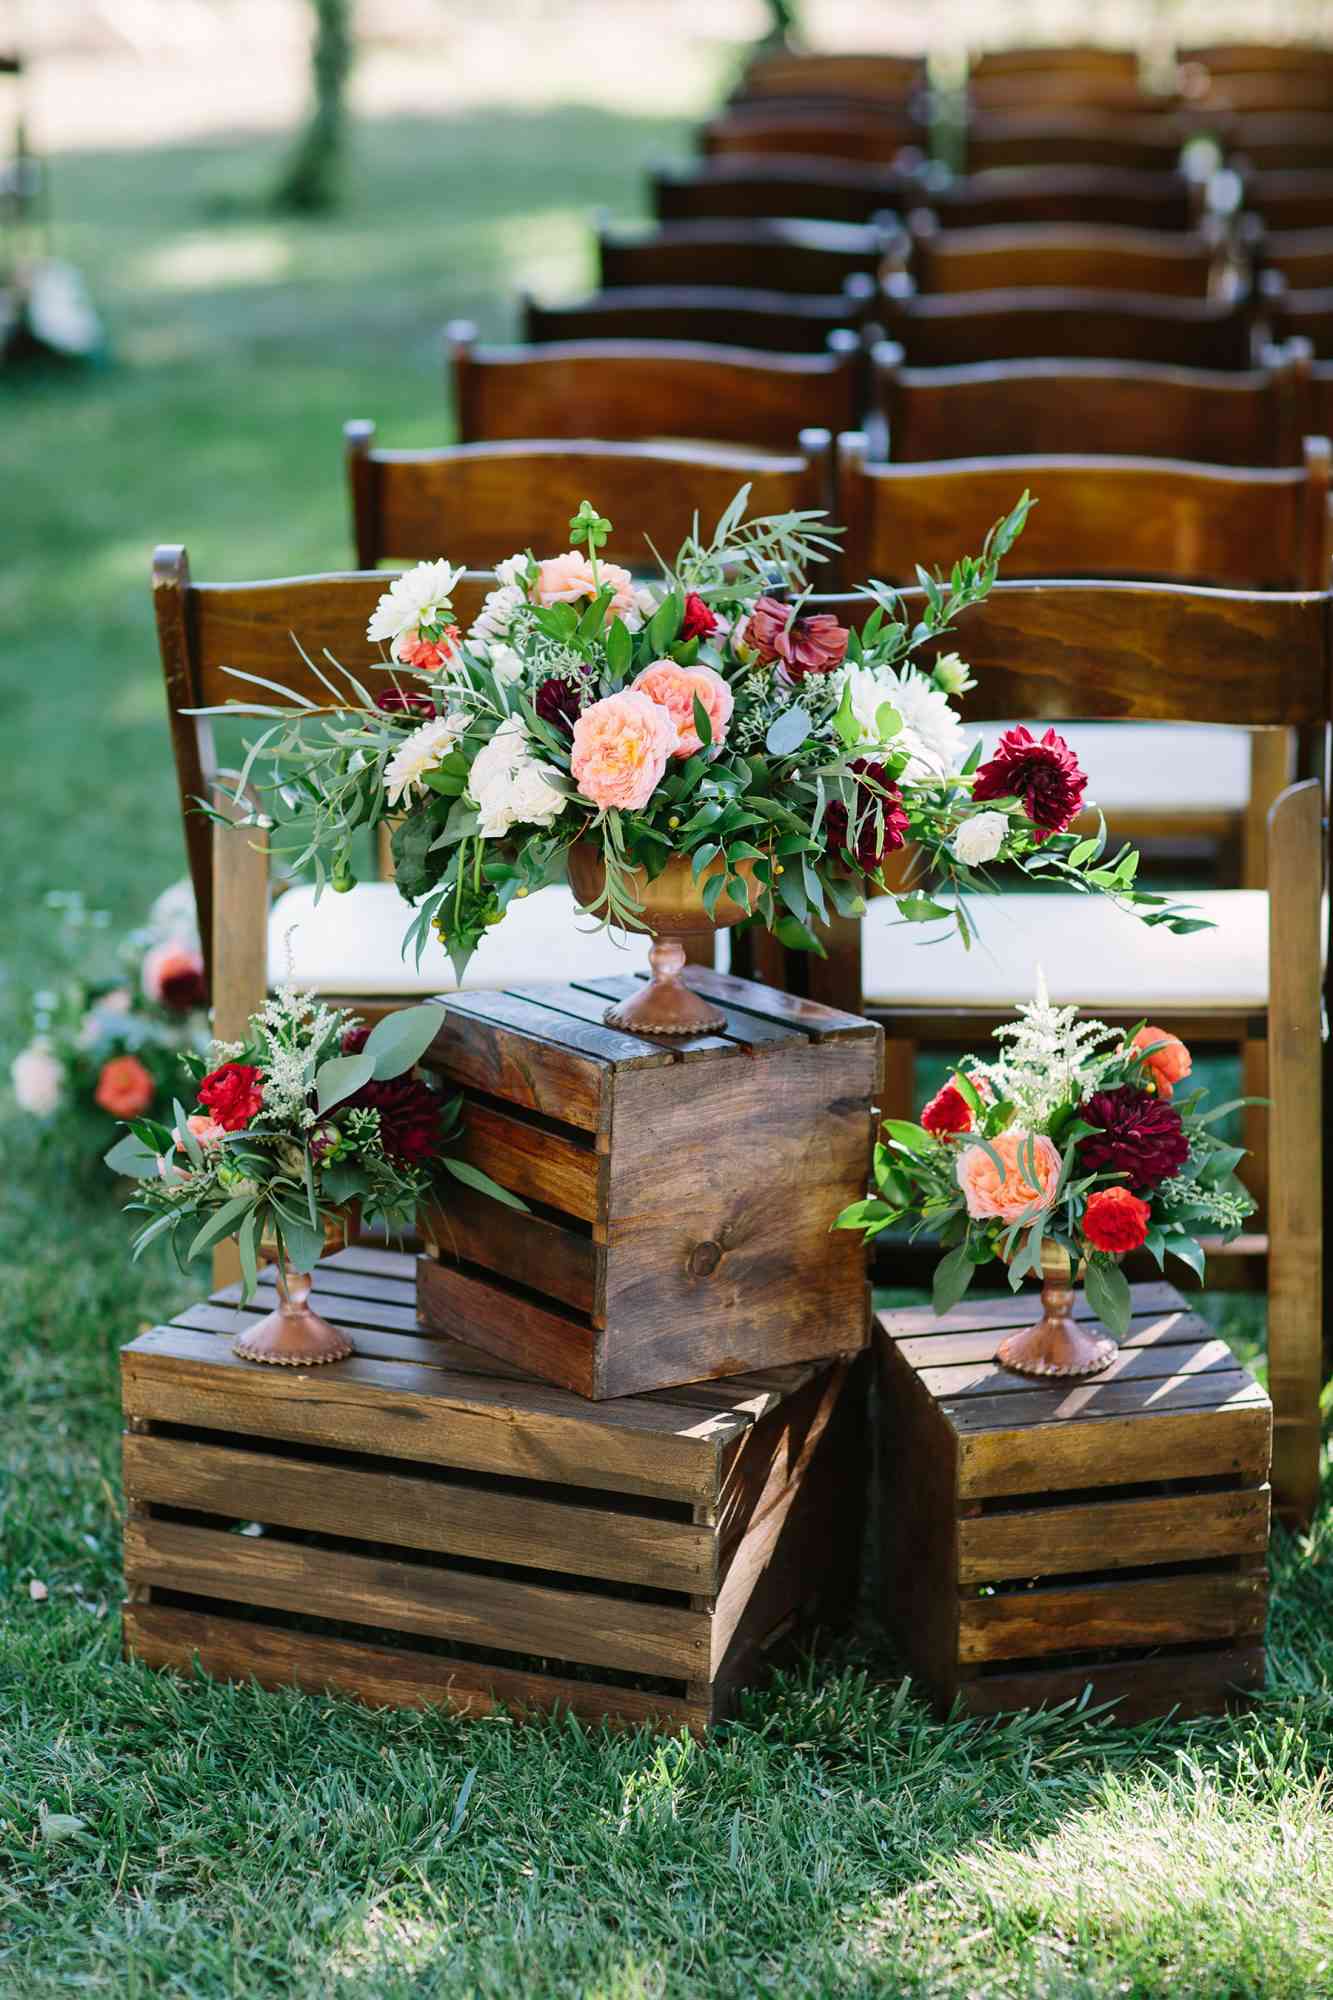 floral decorations sitting on crates